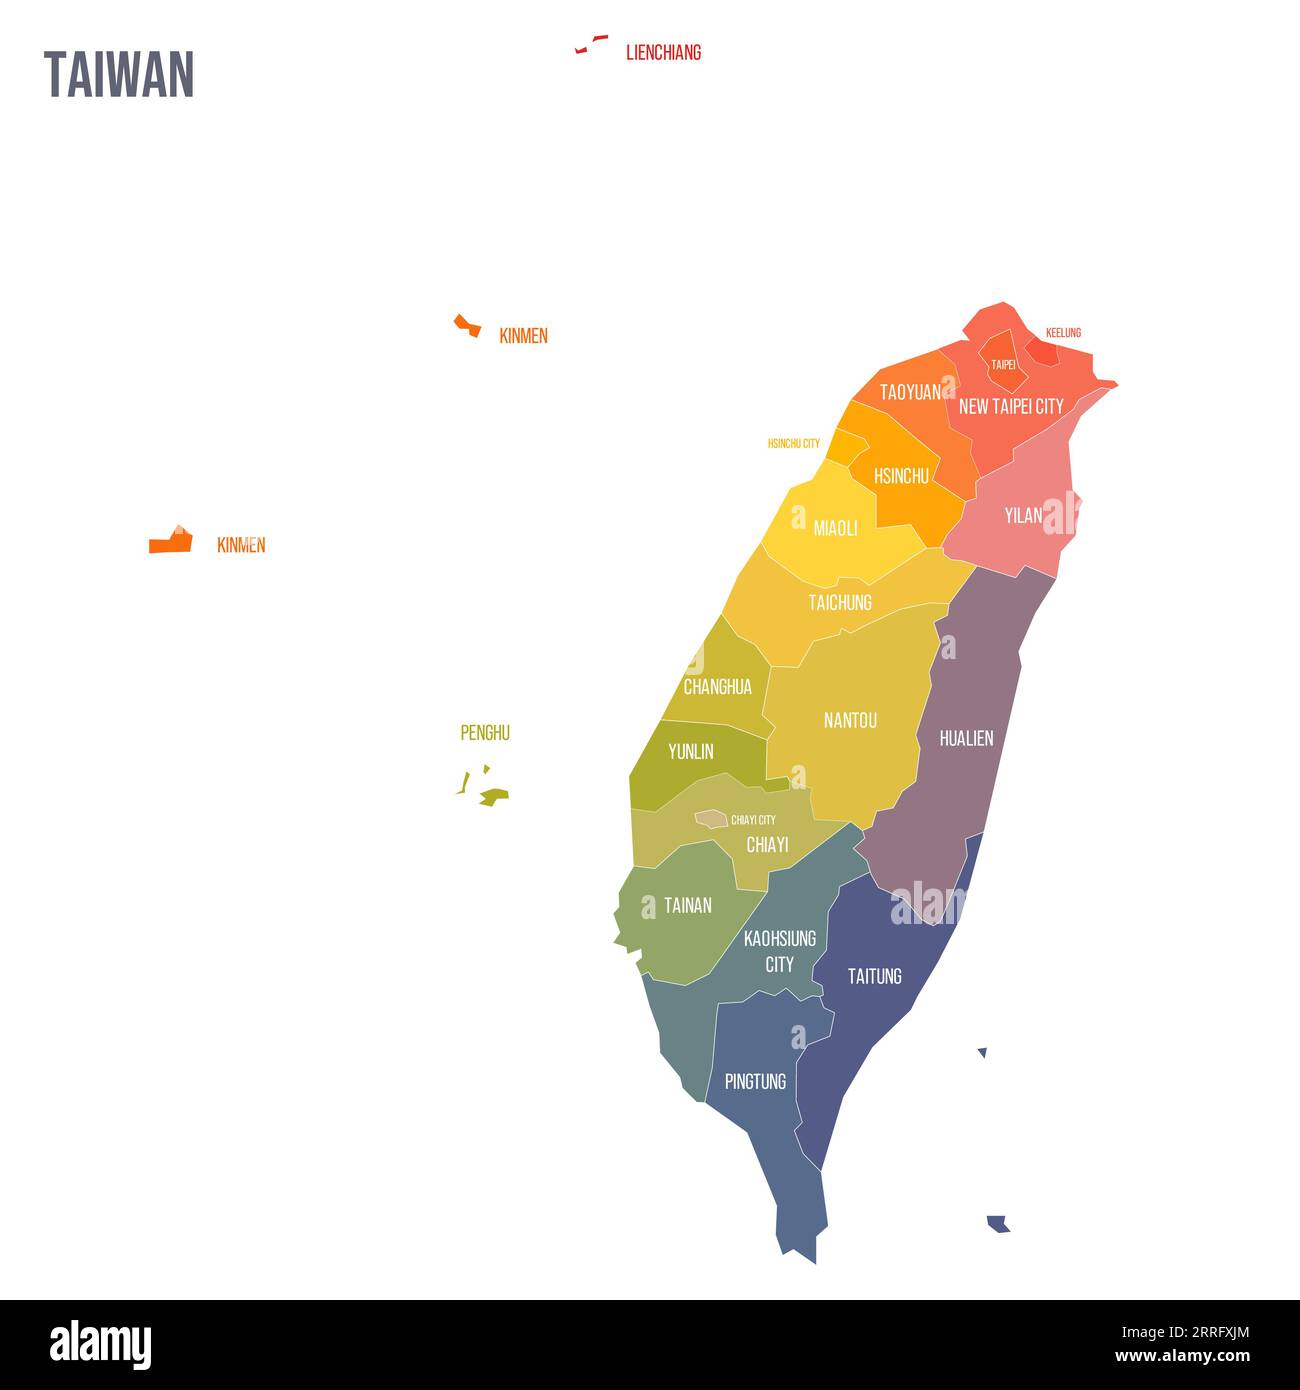 Taiwan political map of administrative divisions - provinces and special municipalities. Colorful spectrum political map with labels and country name. Stock Vector